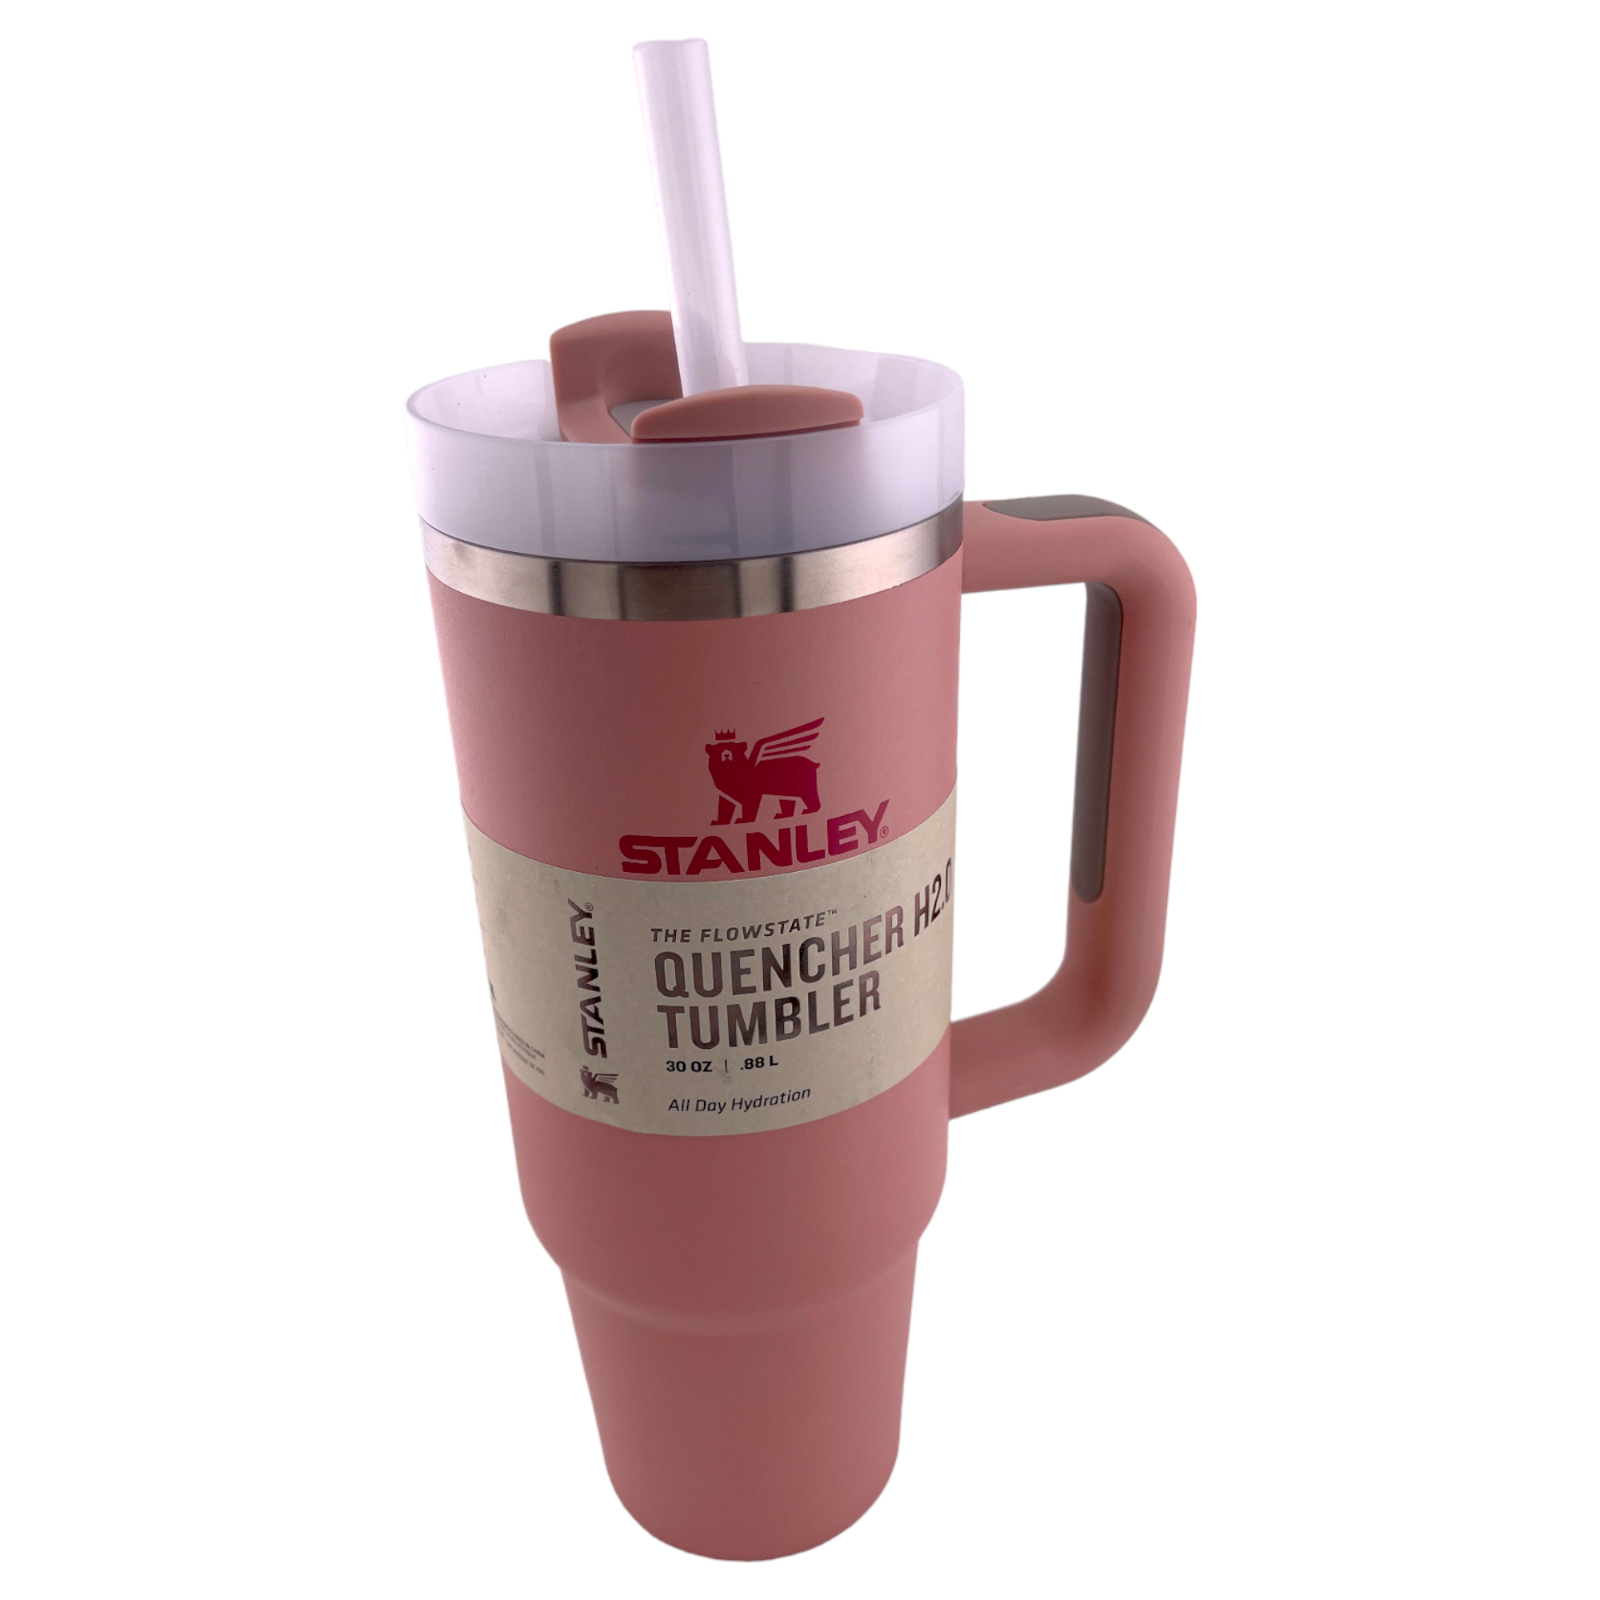 Stanley Quencher H2.O FlowState 30oz Tumbler- Pink Dusk (10-10827